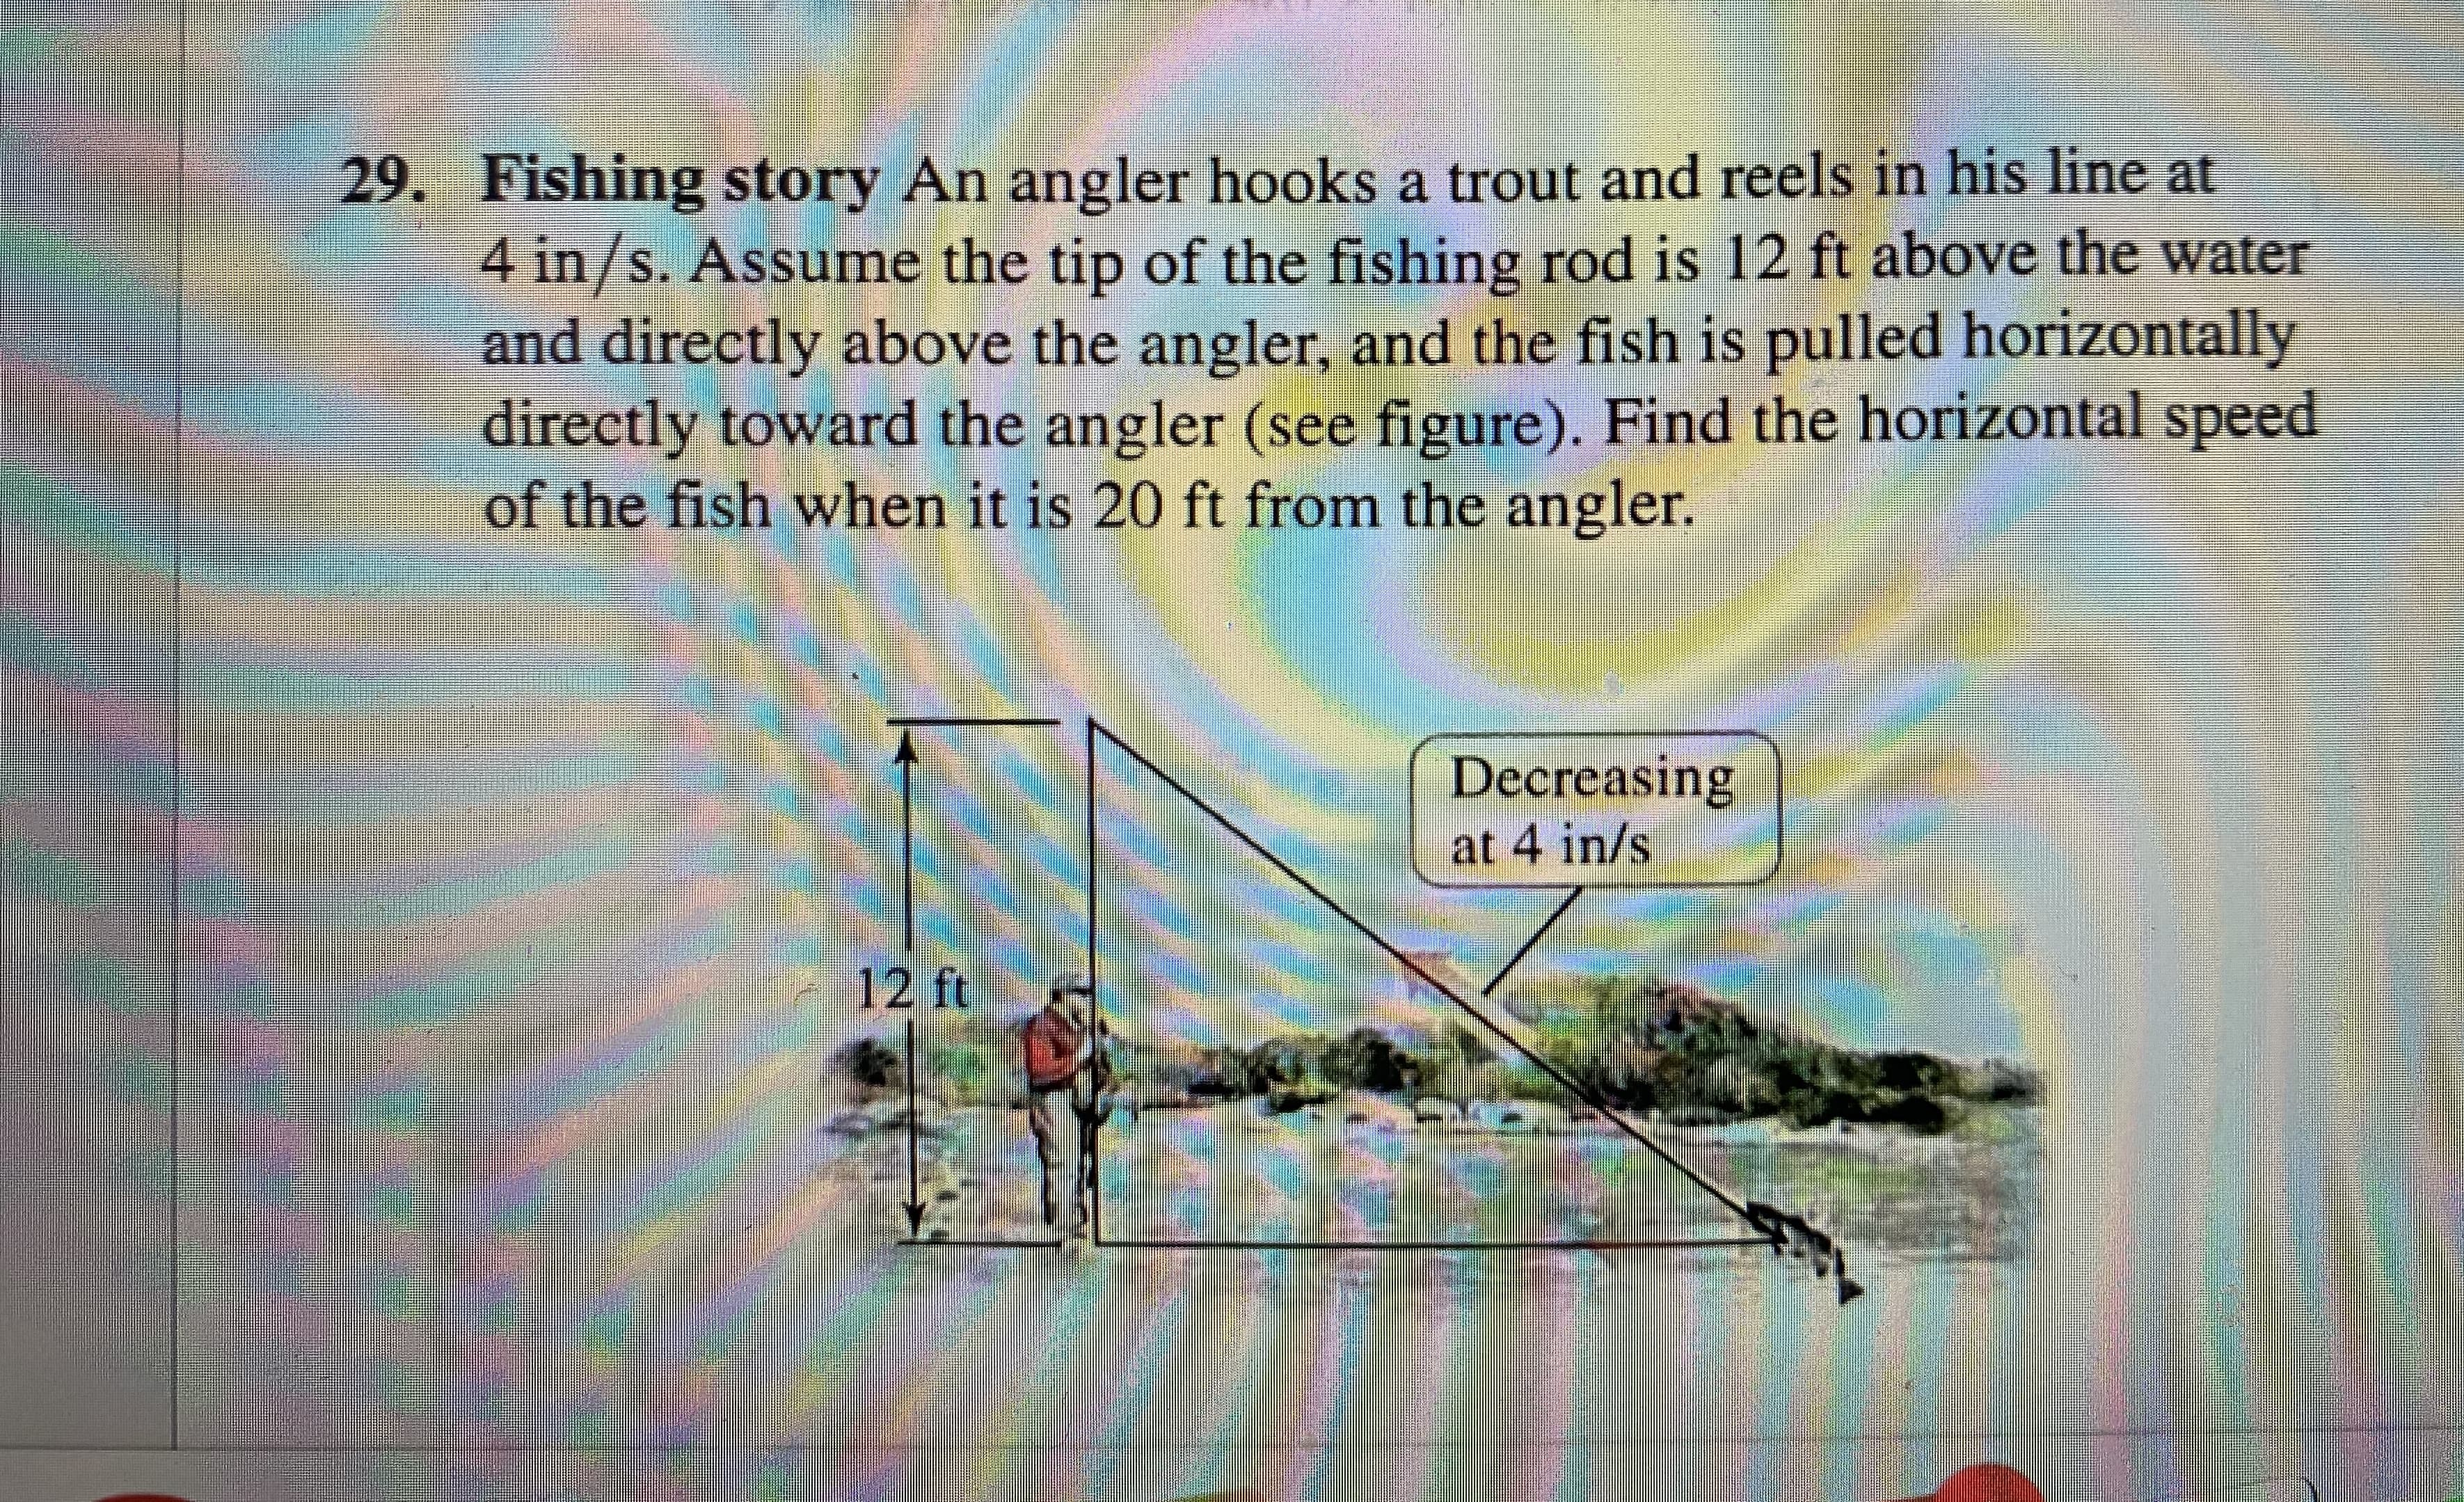 29. Fishing story An angler hooks a trout and reels in his line at
4 in/s. Assume the tip of the fishing rod is 12 ft above the water
and directly above the angler, and the fish is pulled horizontally
directly toward the angler (see figure). Find the horizontal speed
of the fish when it is 20 ft from the angler.
Decreasing
at 4 in/s
12 ft
